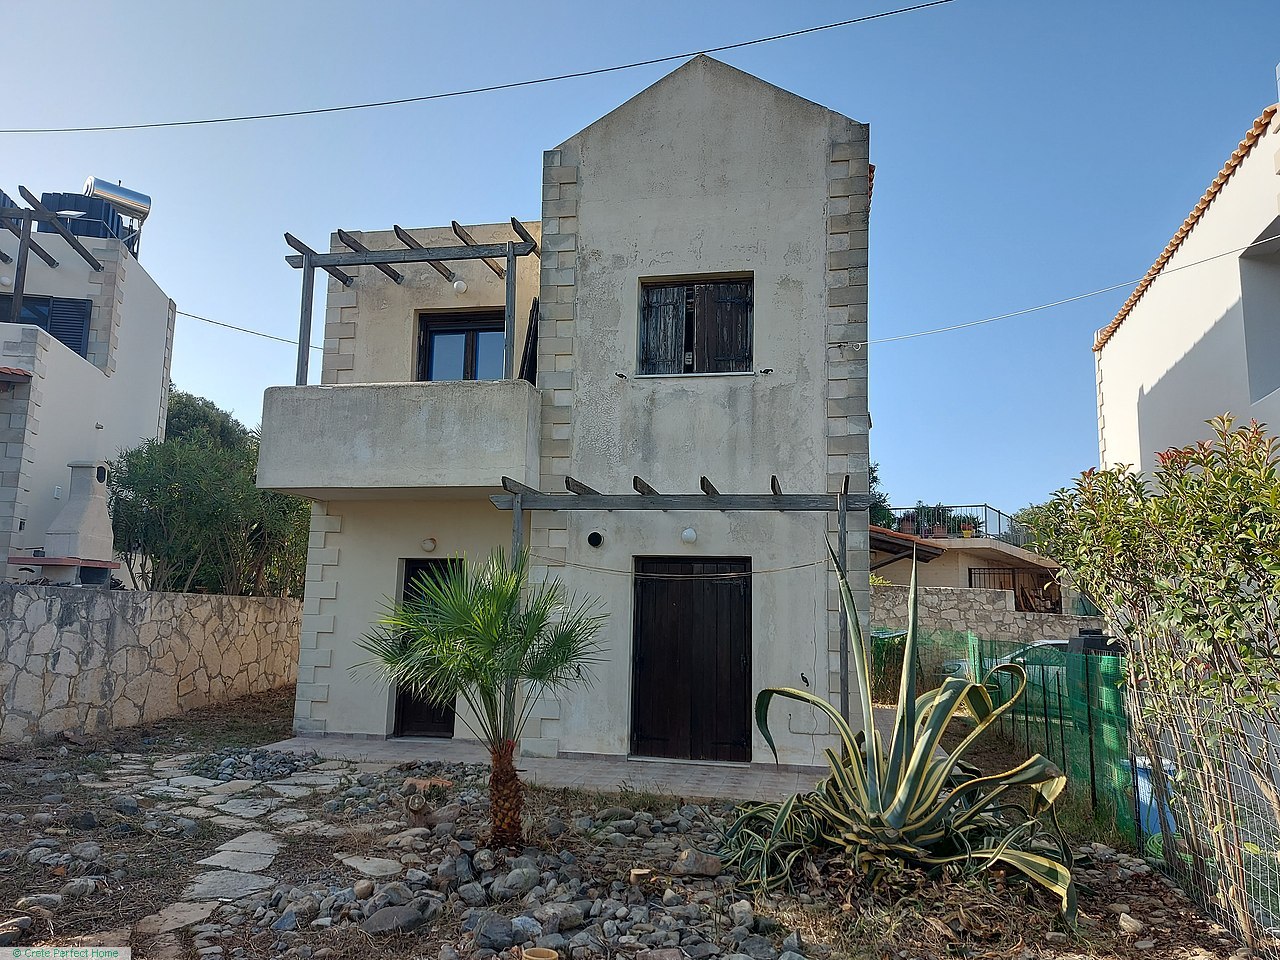 78m2 neglected 3-bed house, garden, rural and sea views, 3km beach, needs repairs